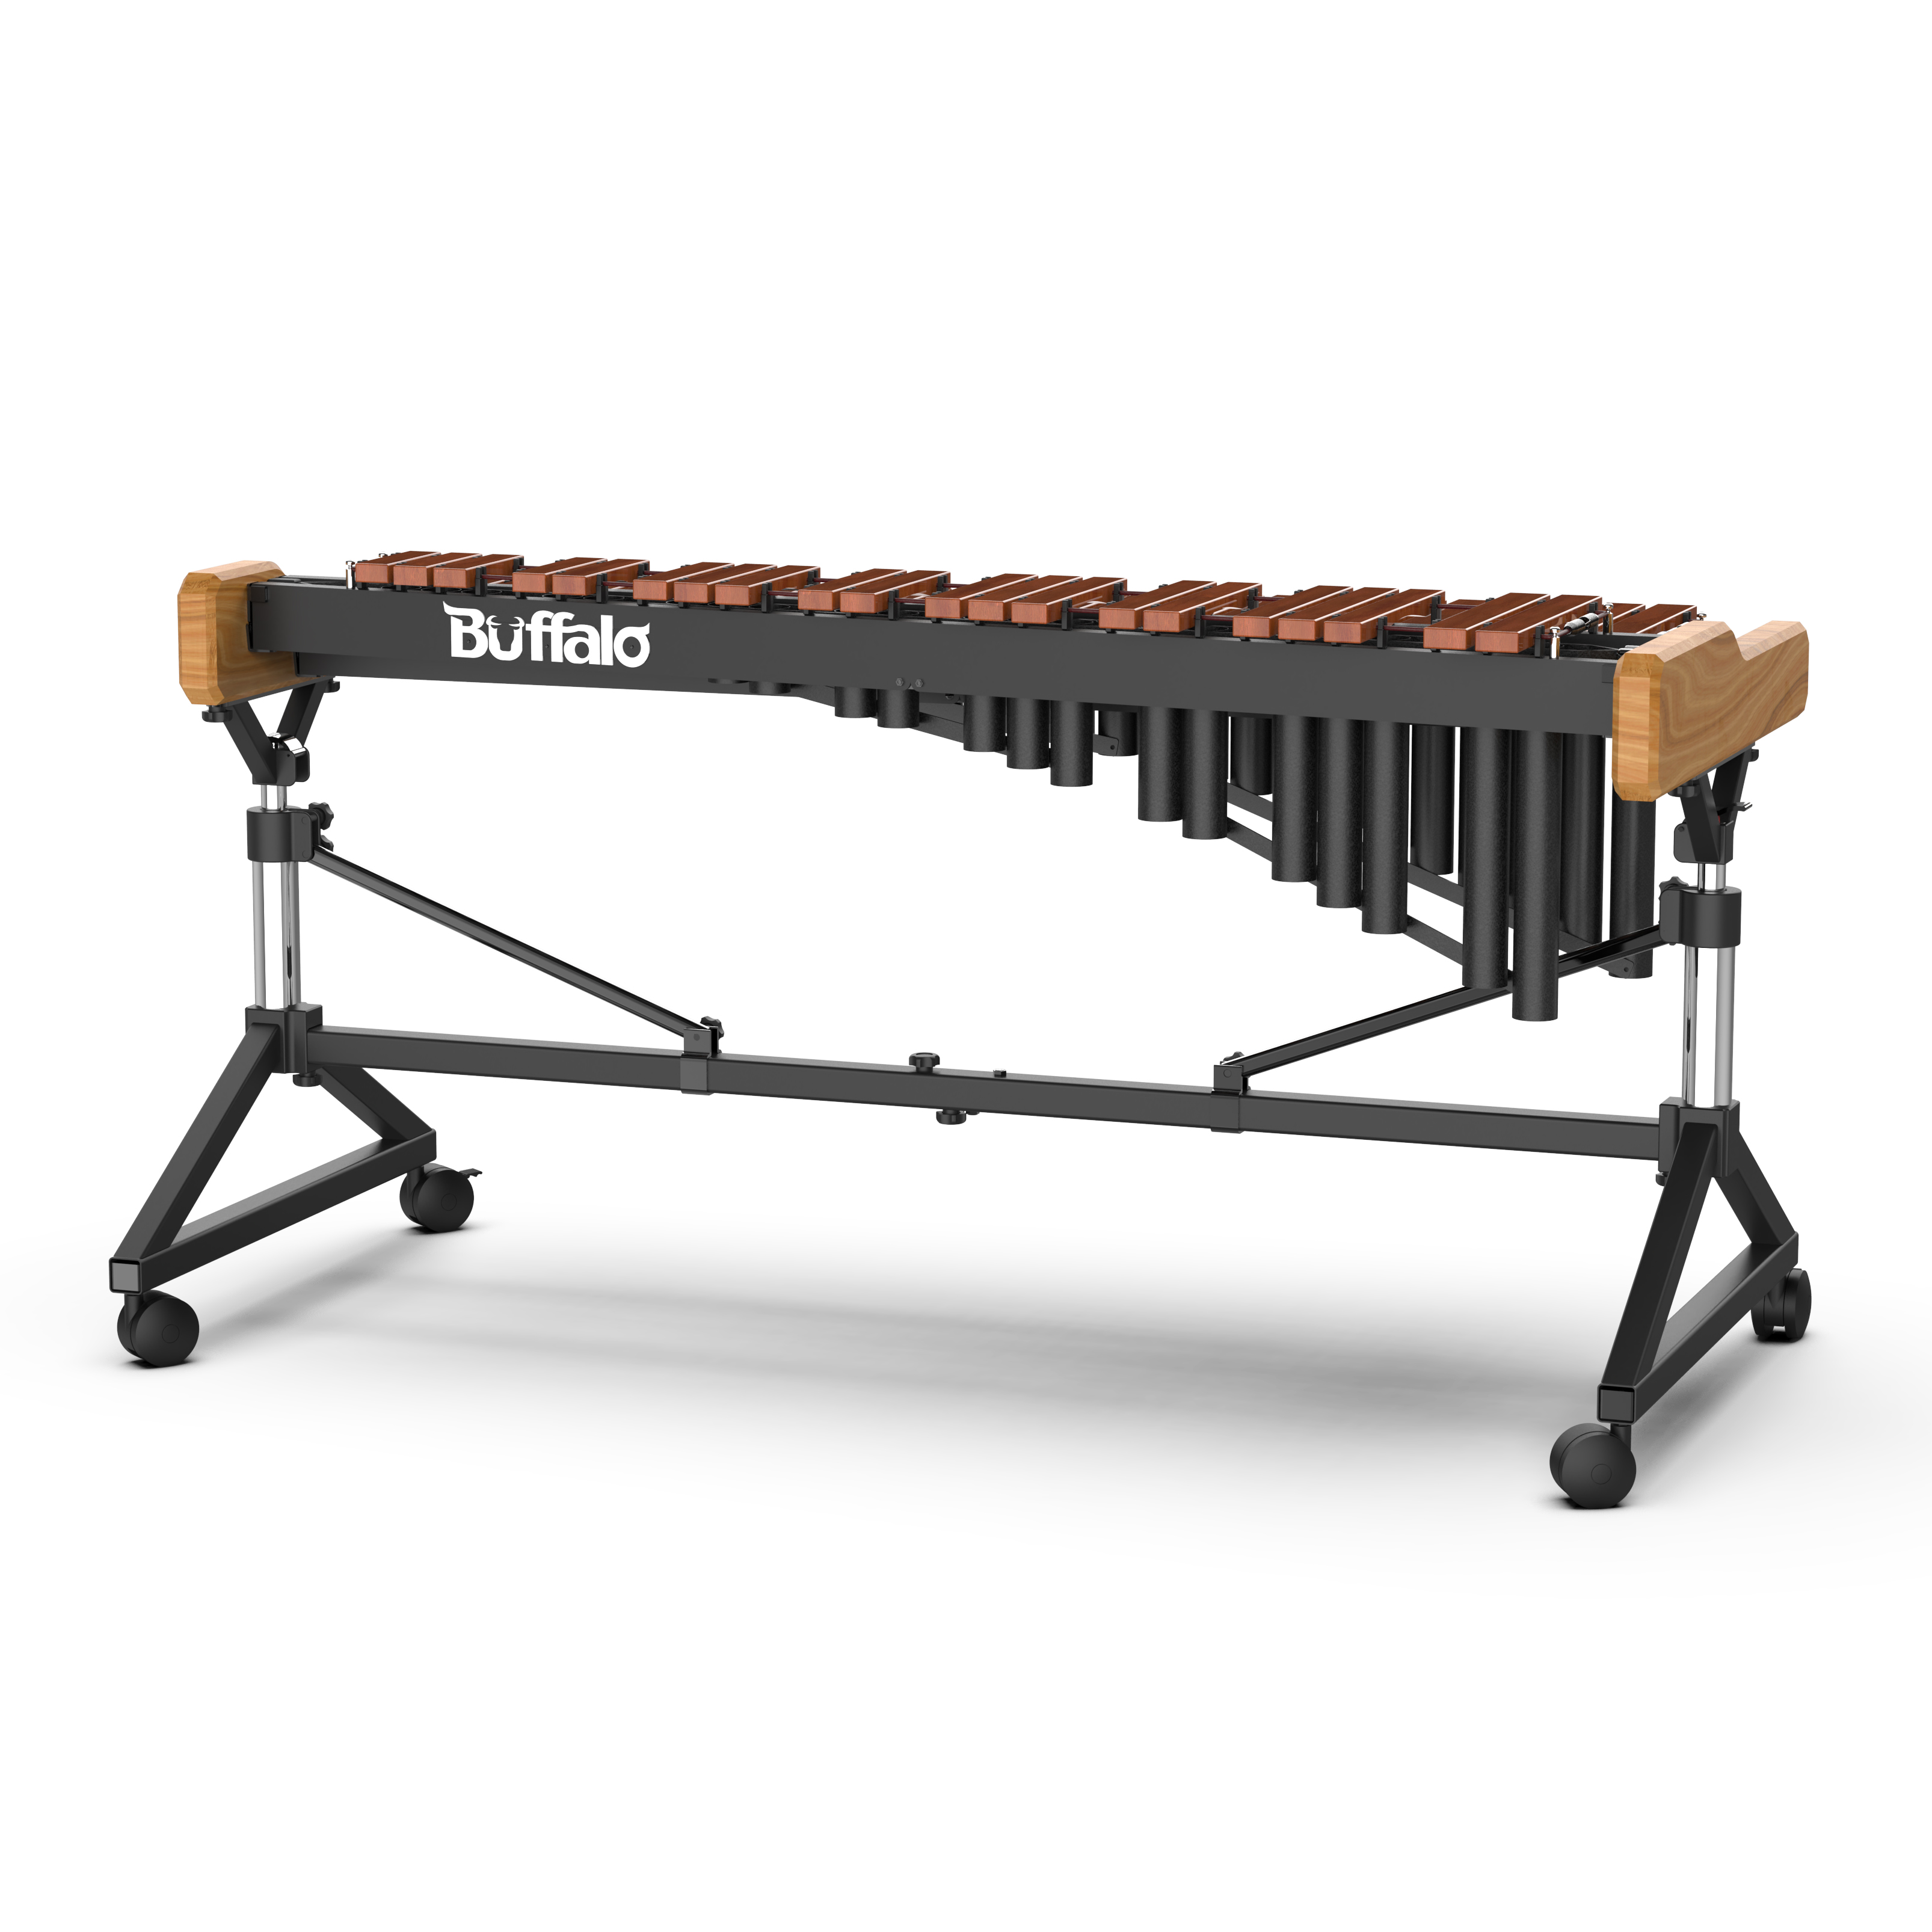 Buffalo Percussion | Marimba, the one you are searching for.